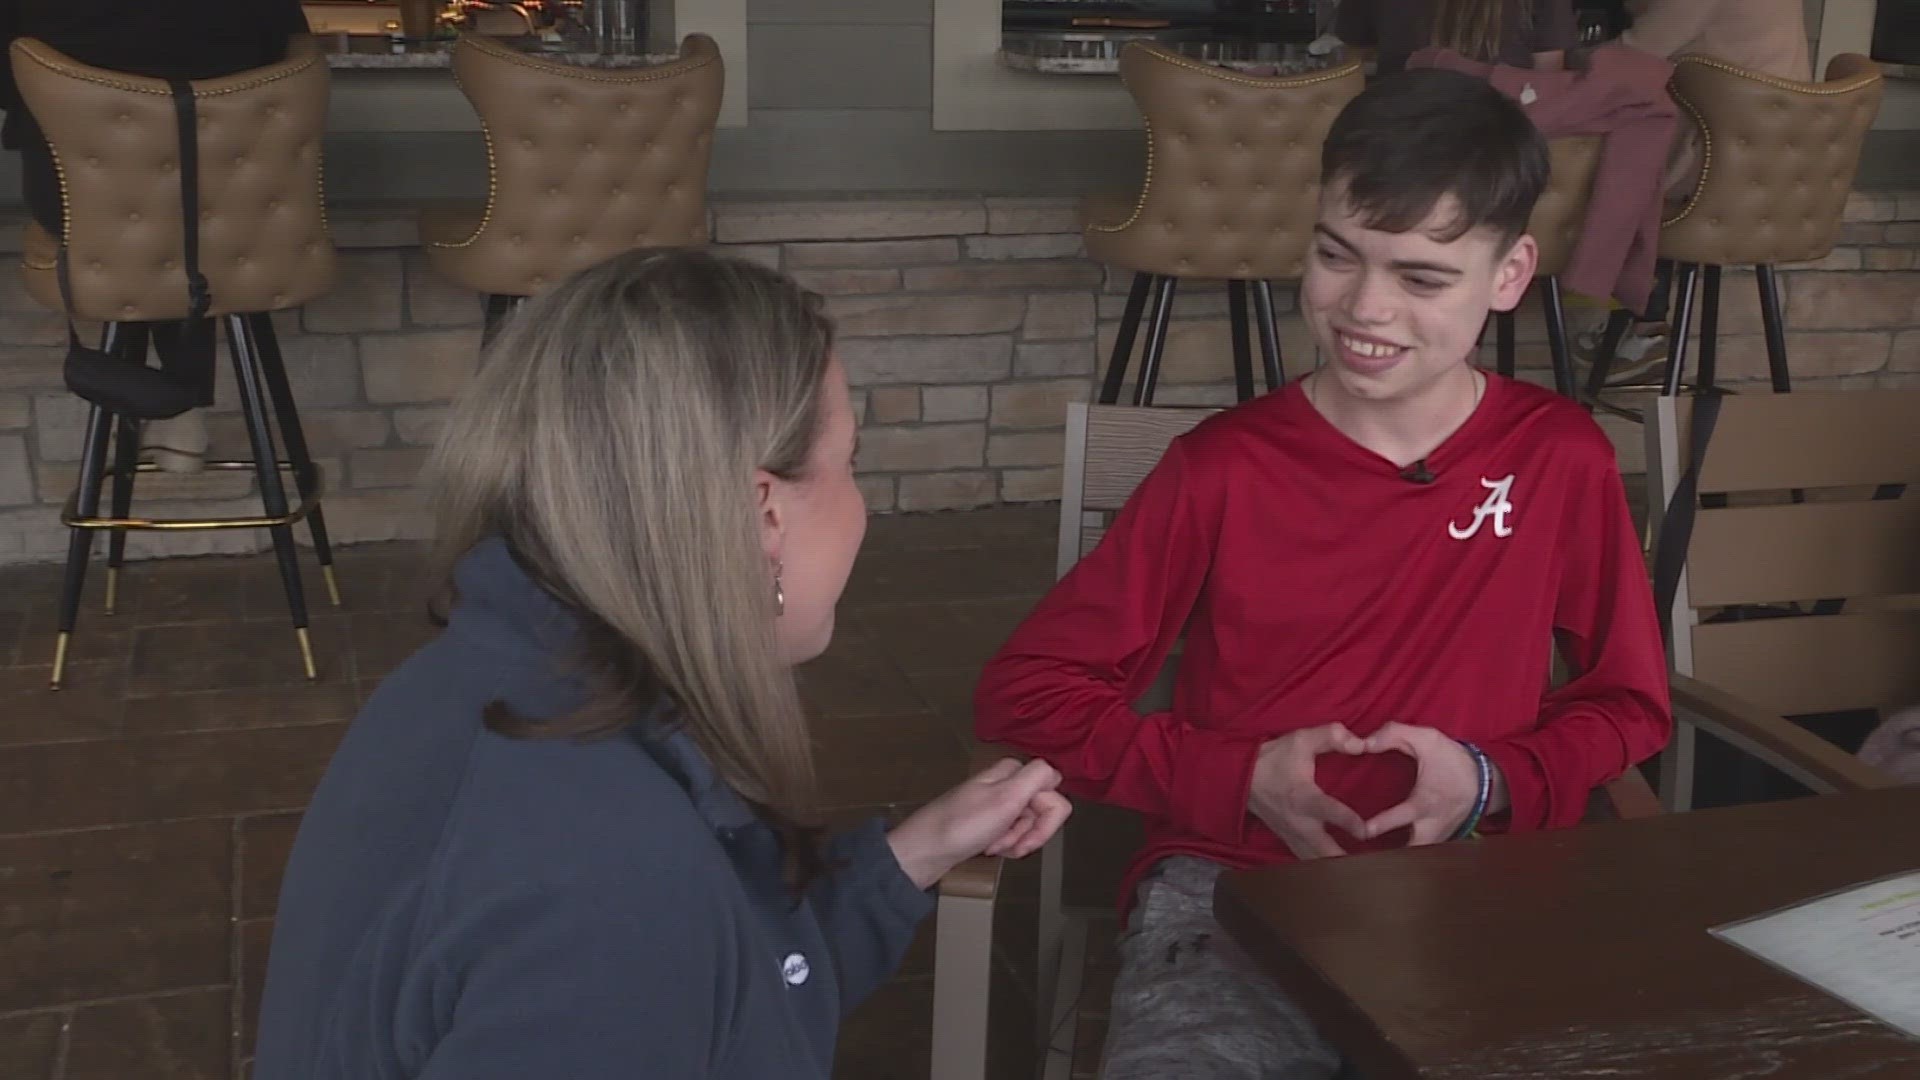 A team effort made a dream come true for one of Alabama's biggest fans.